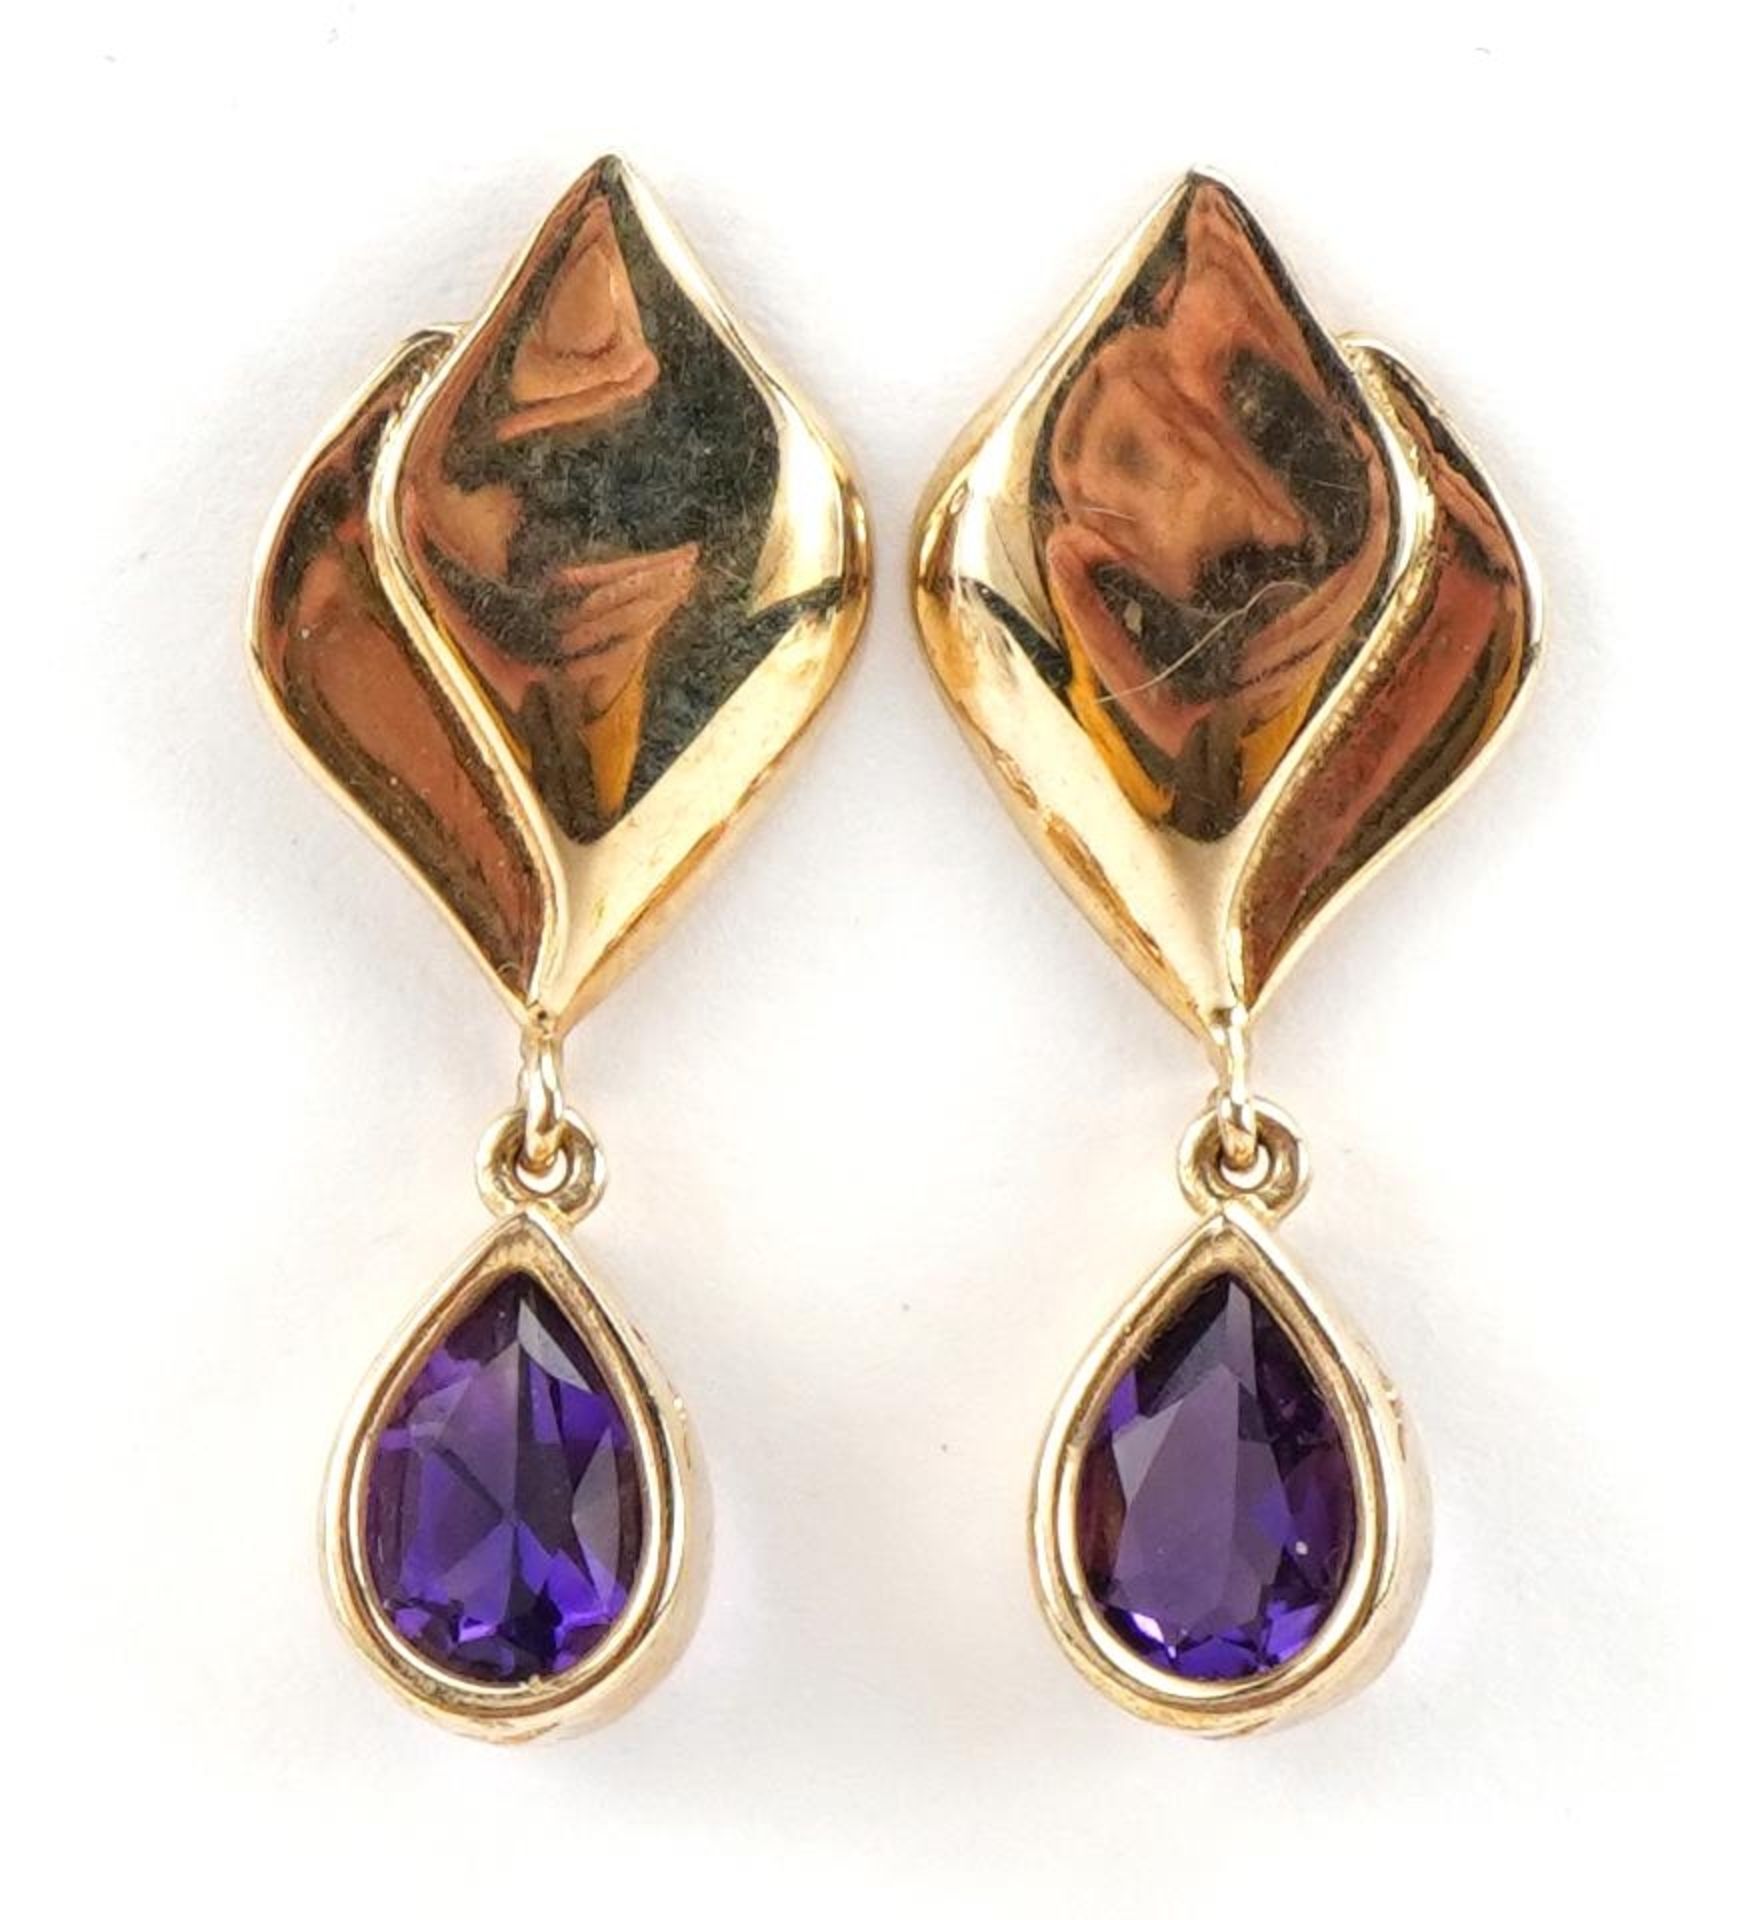 Pair of unmarked 9ct gold amethyst drop earrings, 2.5cm high, 2.9g